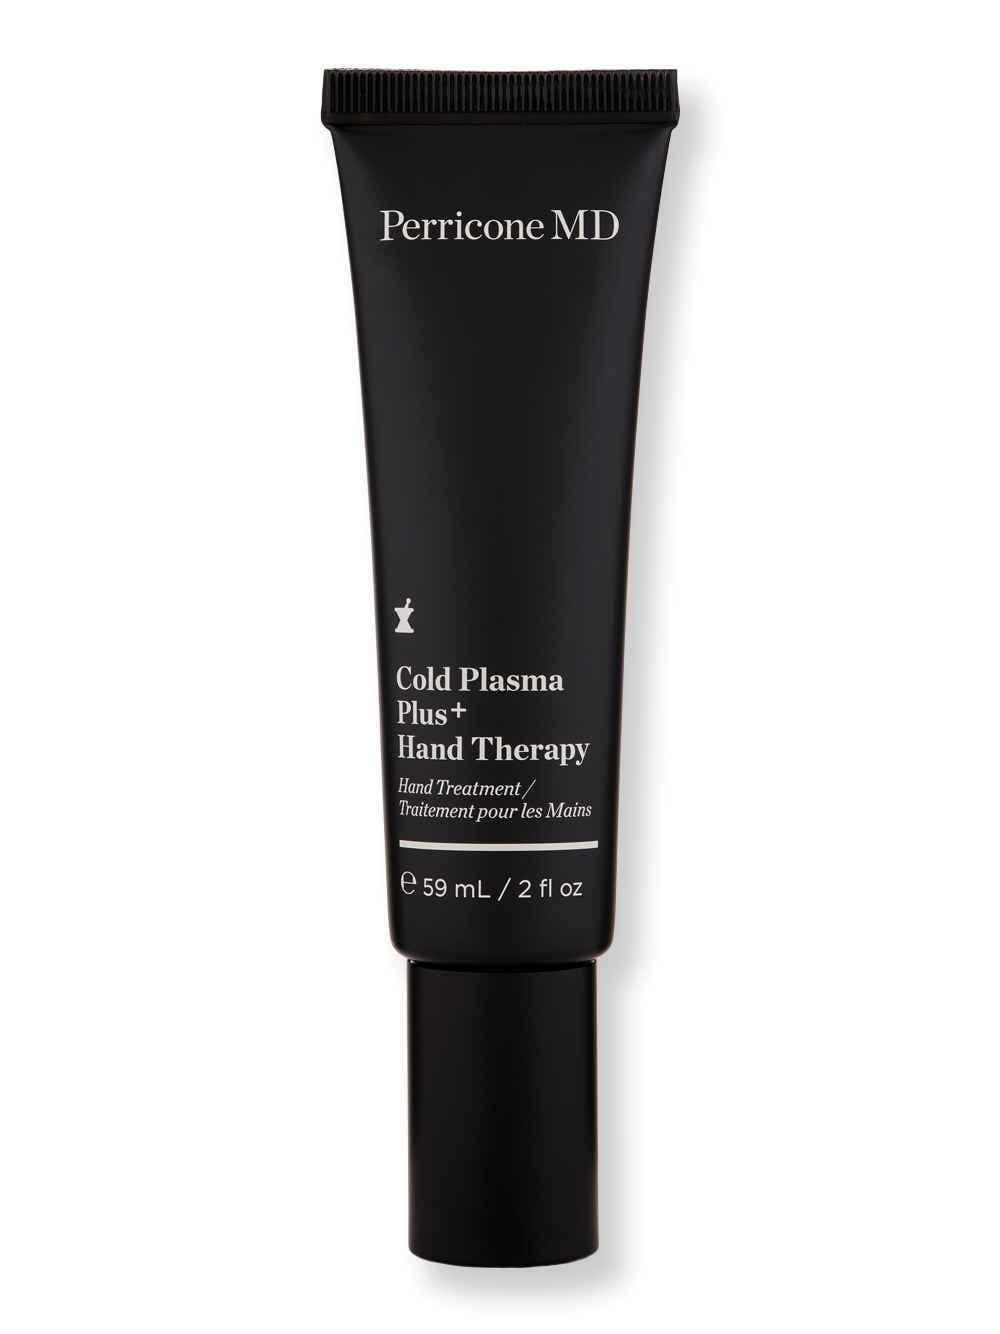 Perricone MD Perricone MD Cold Plasma Plus+ Hand Therapy 2 oz59 ml Hand Creams & Lotions 